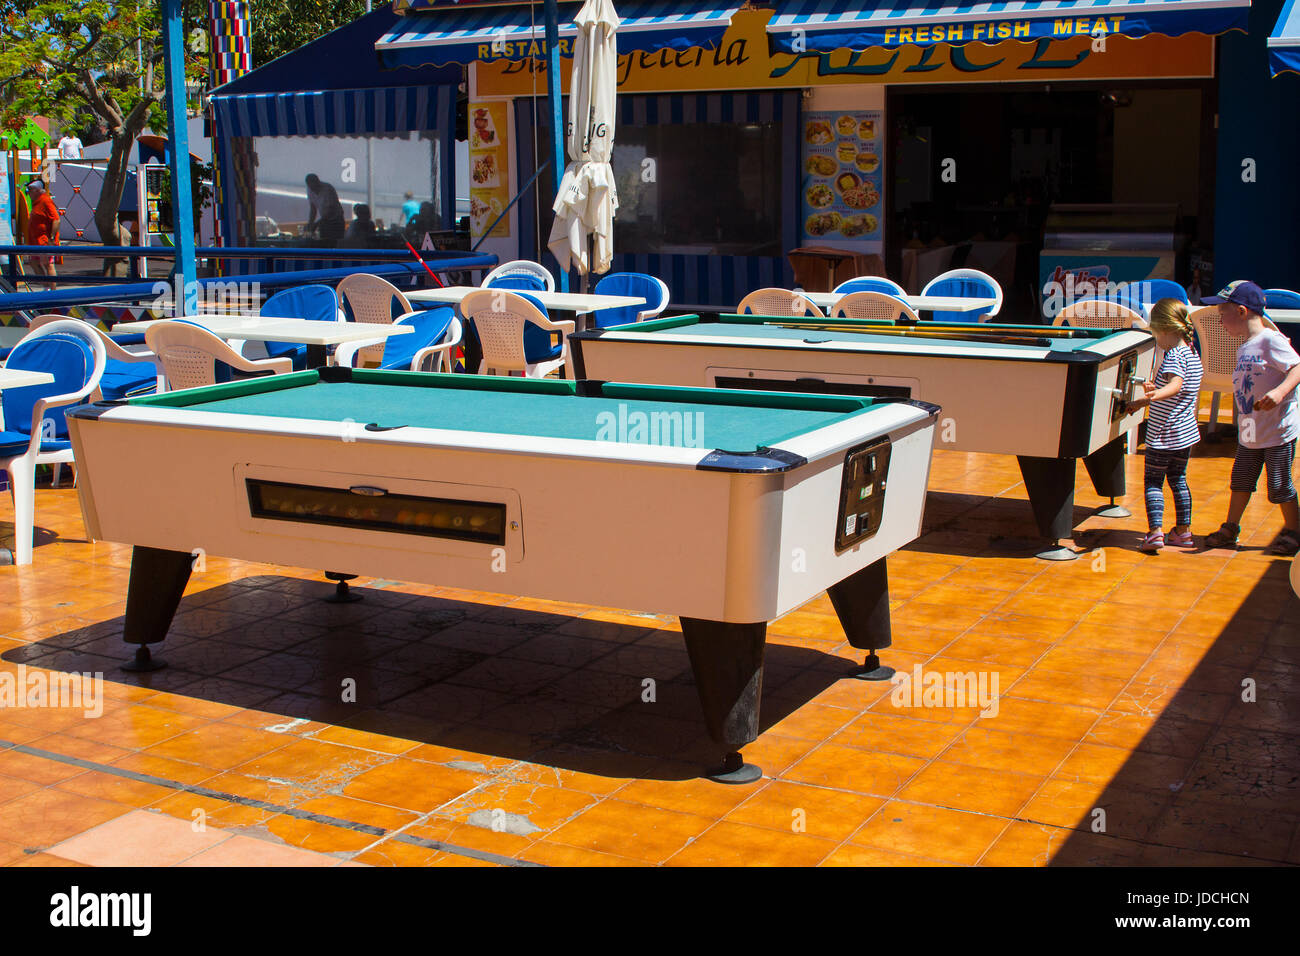 Two young children playing around pool tables in a recreation area in a shopping mall precinct Stock Photo